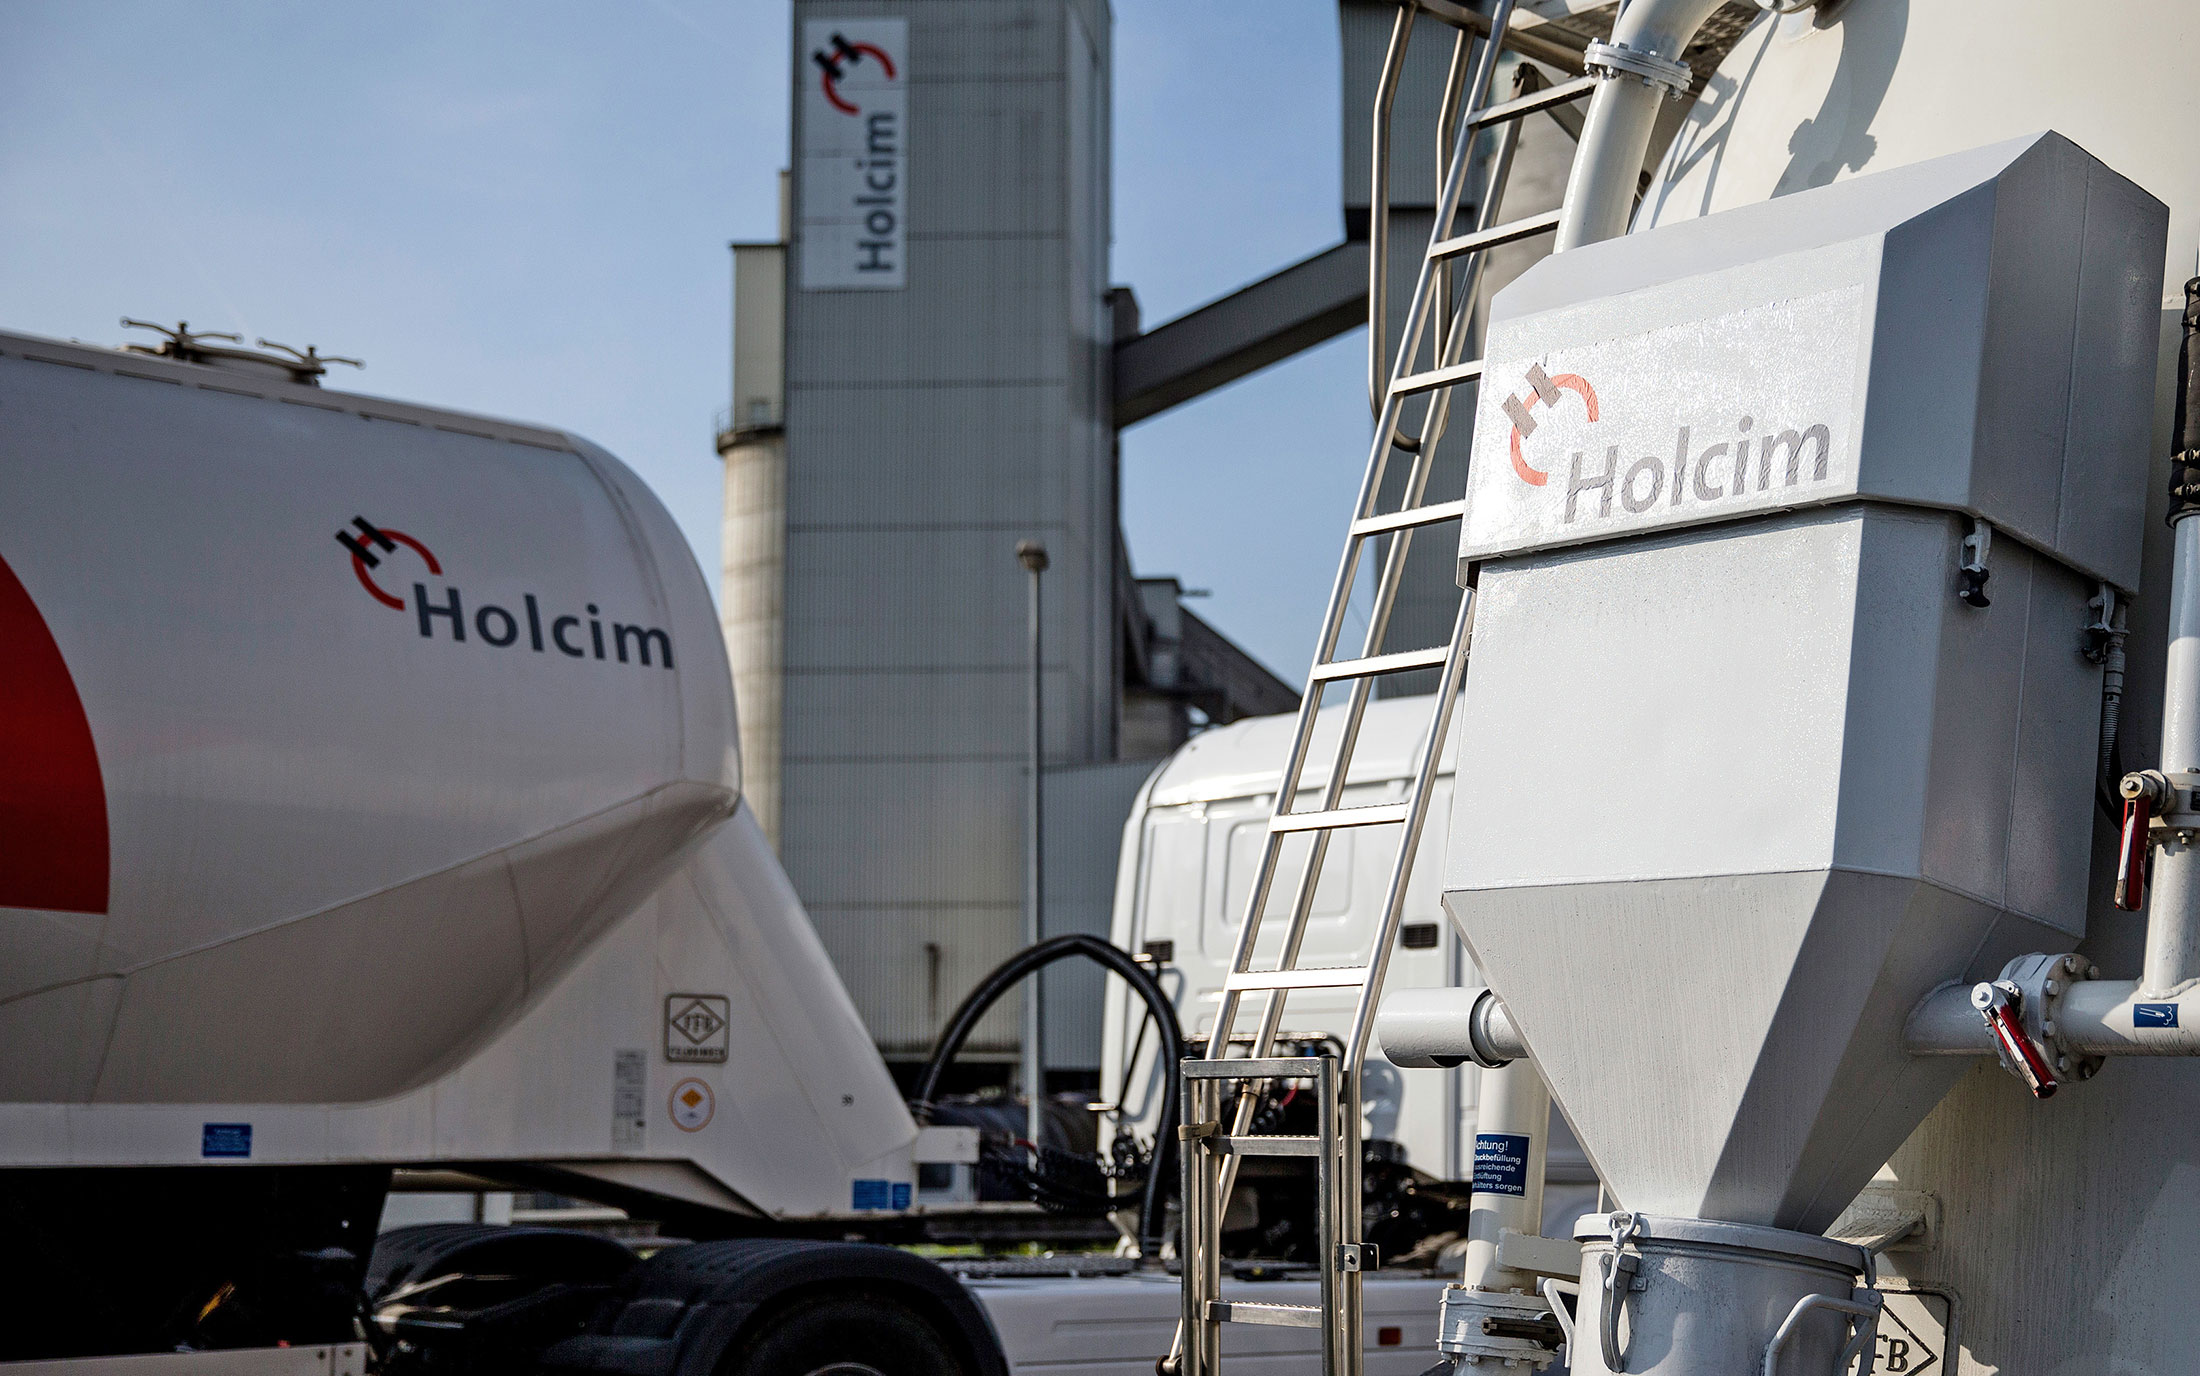 Holcim Ltd And Lafarge SA Merge To Create The World's Biggest Cement Maker